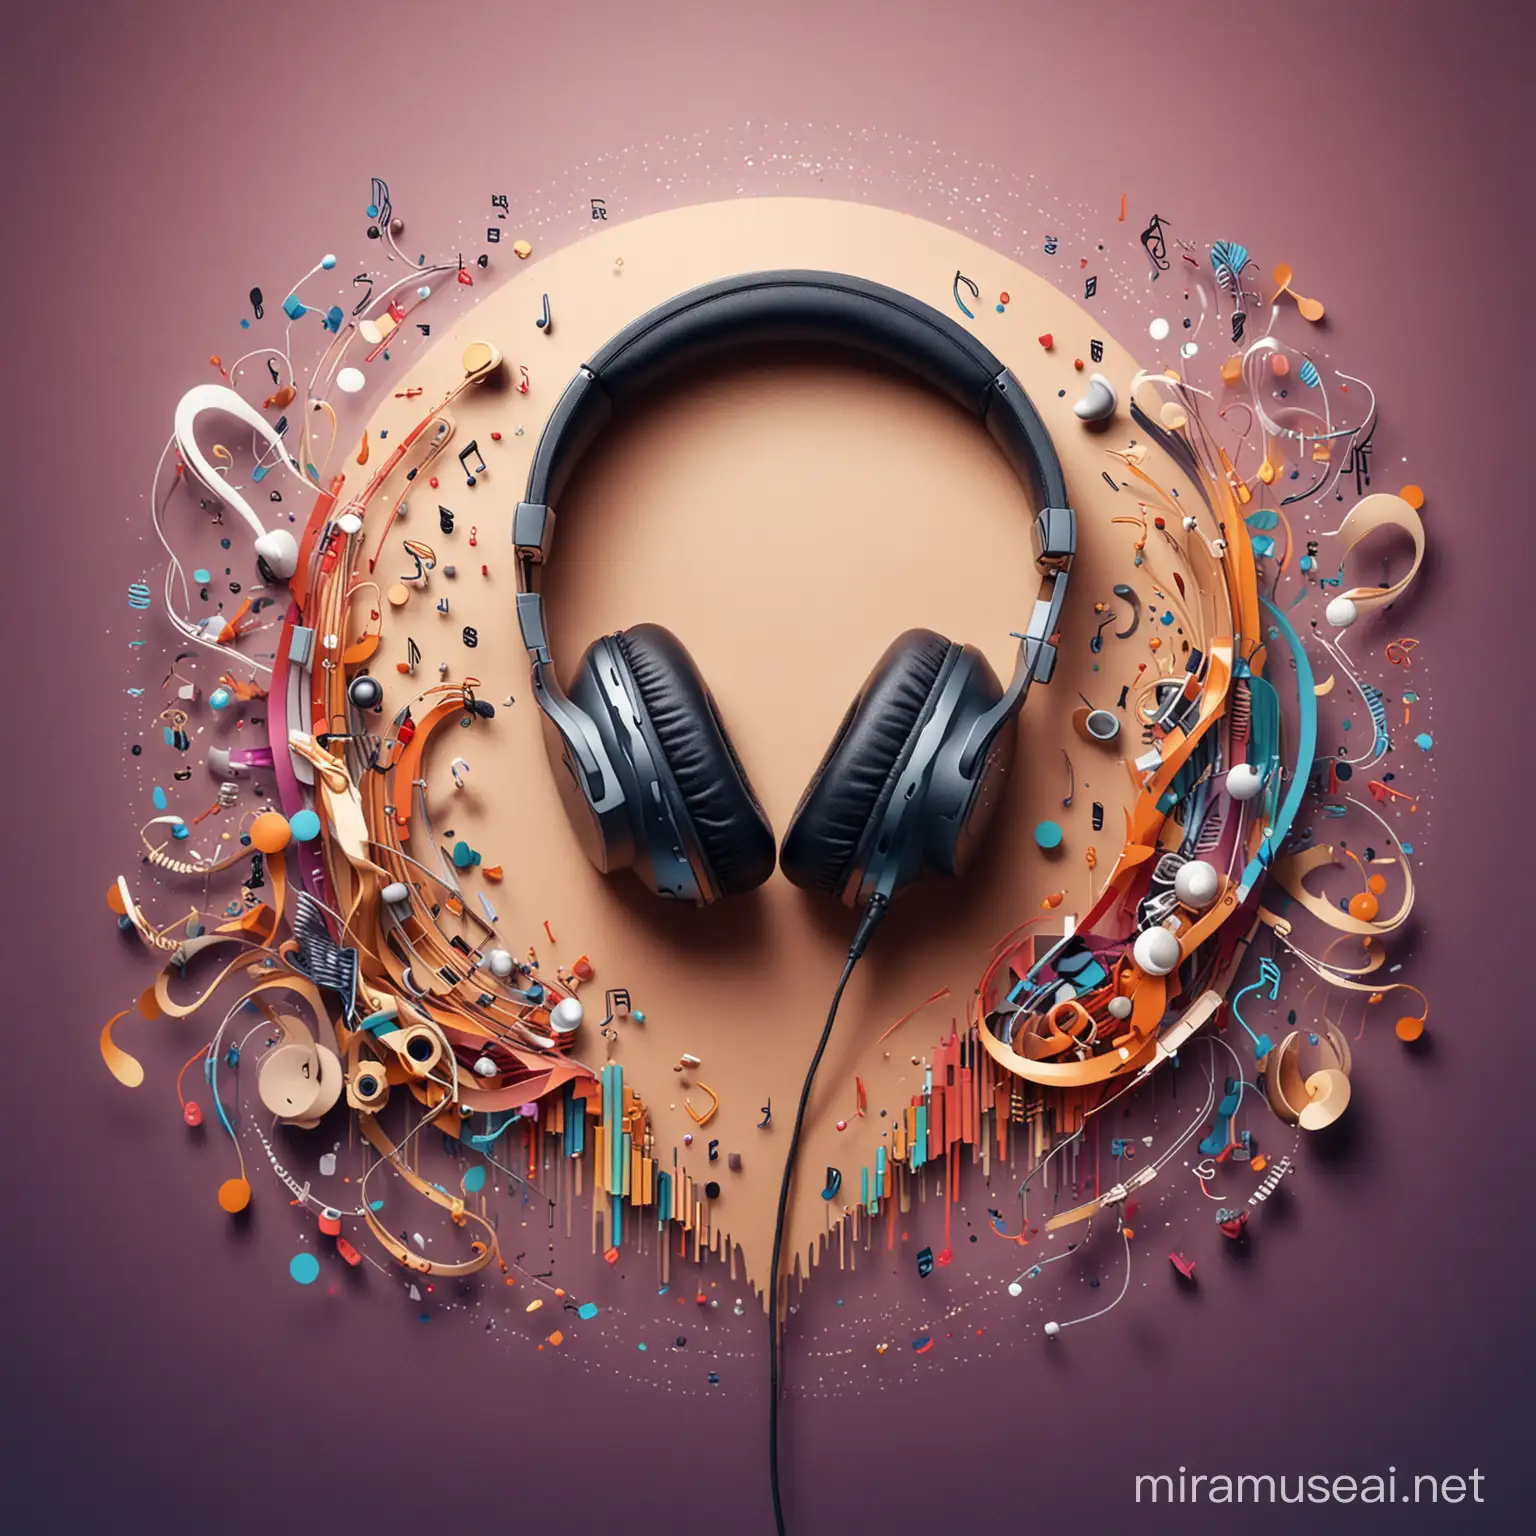 Musical Instruments and Headphones on Ornate Background